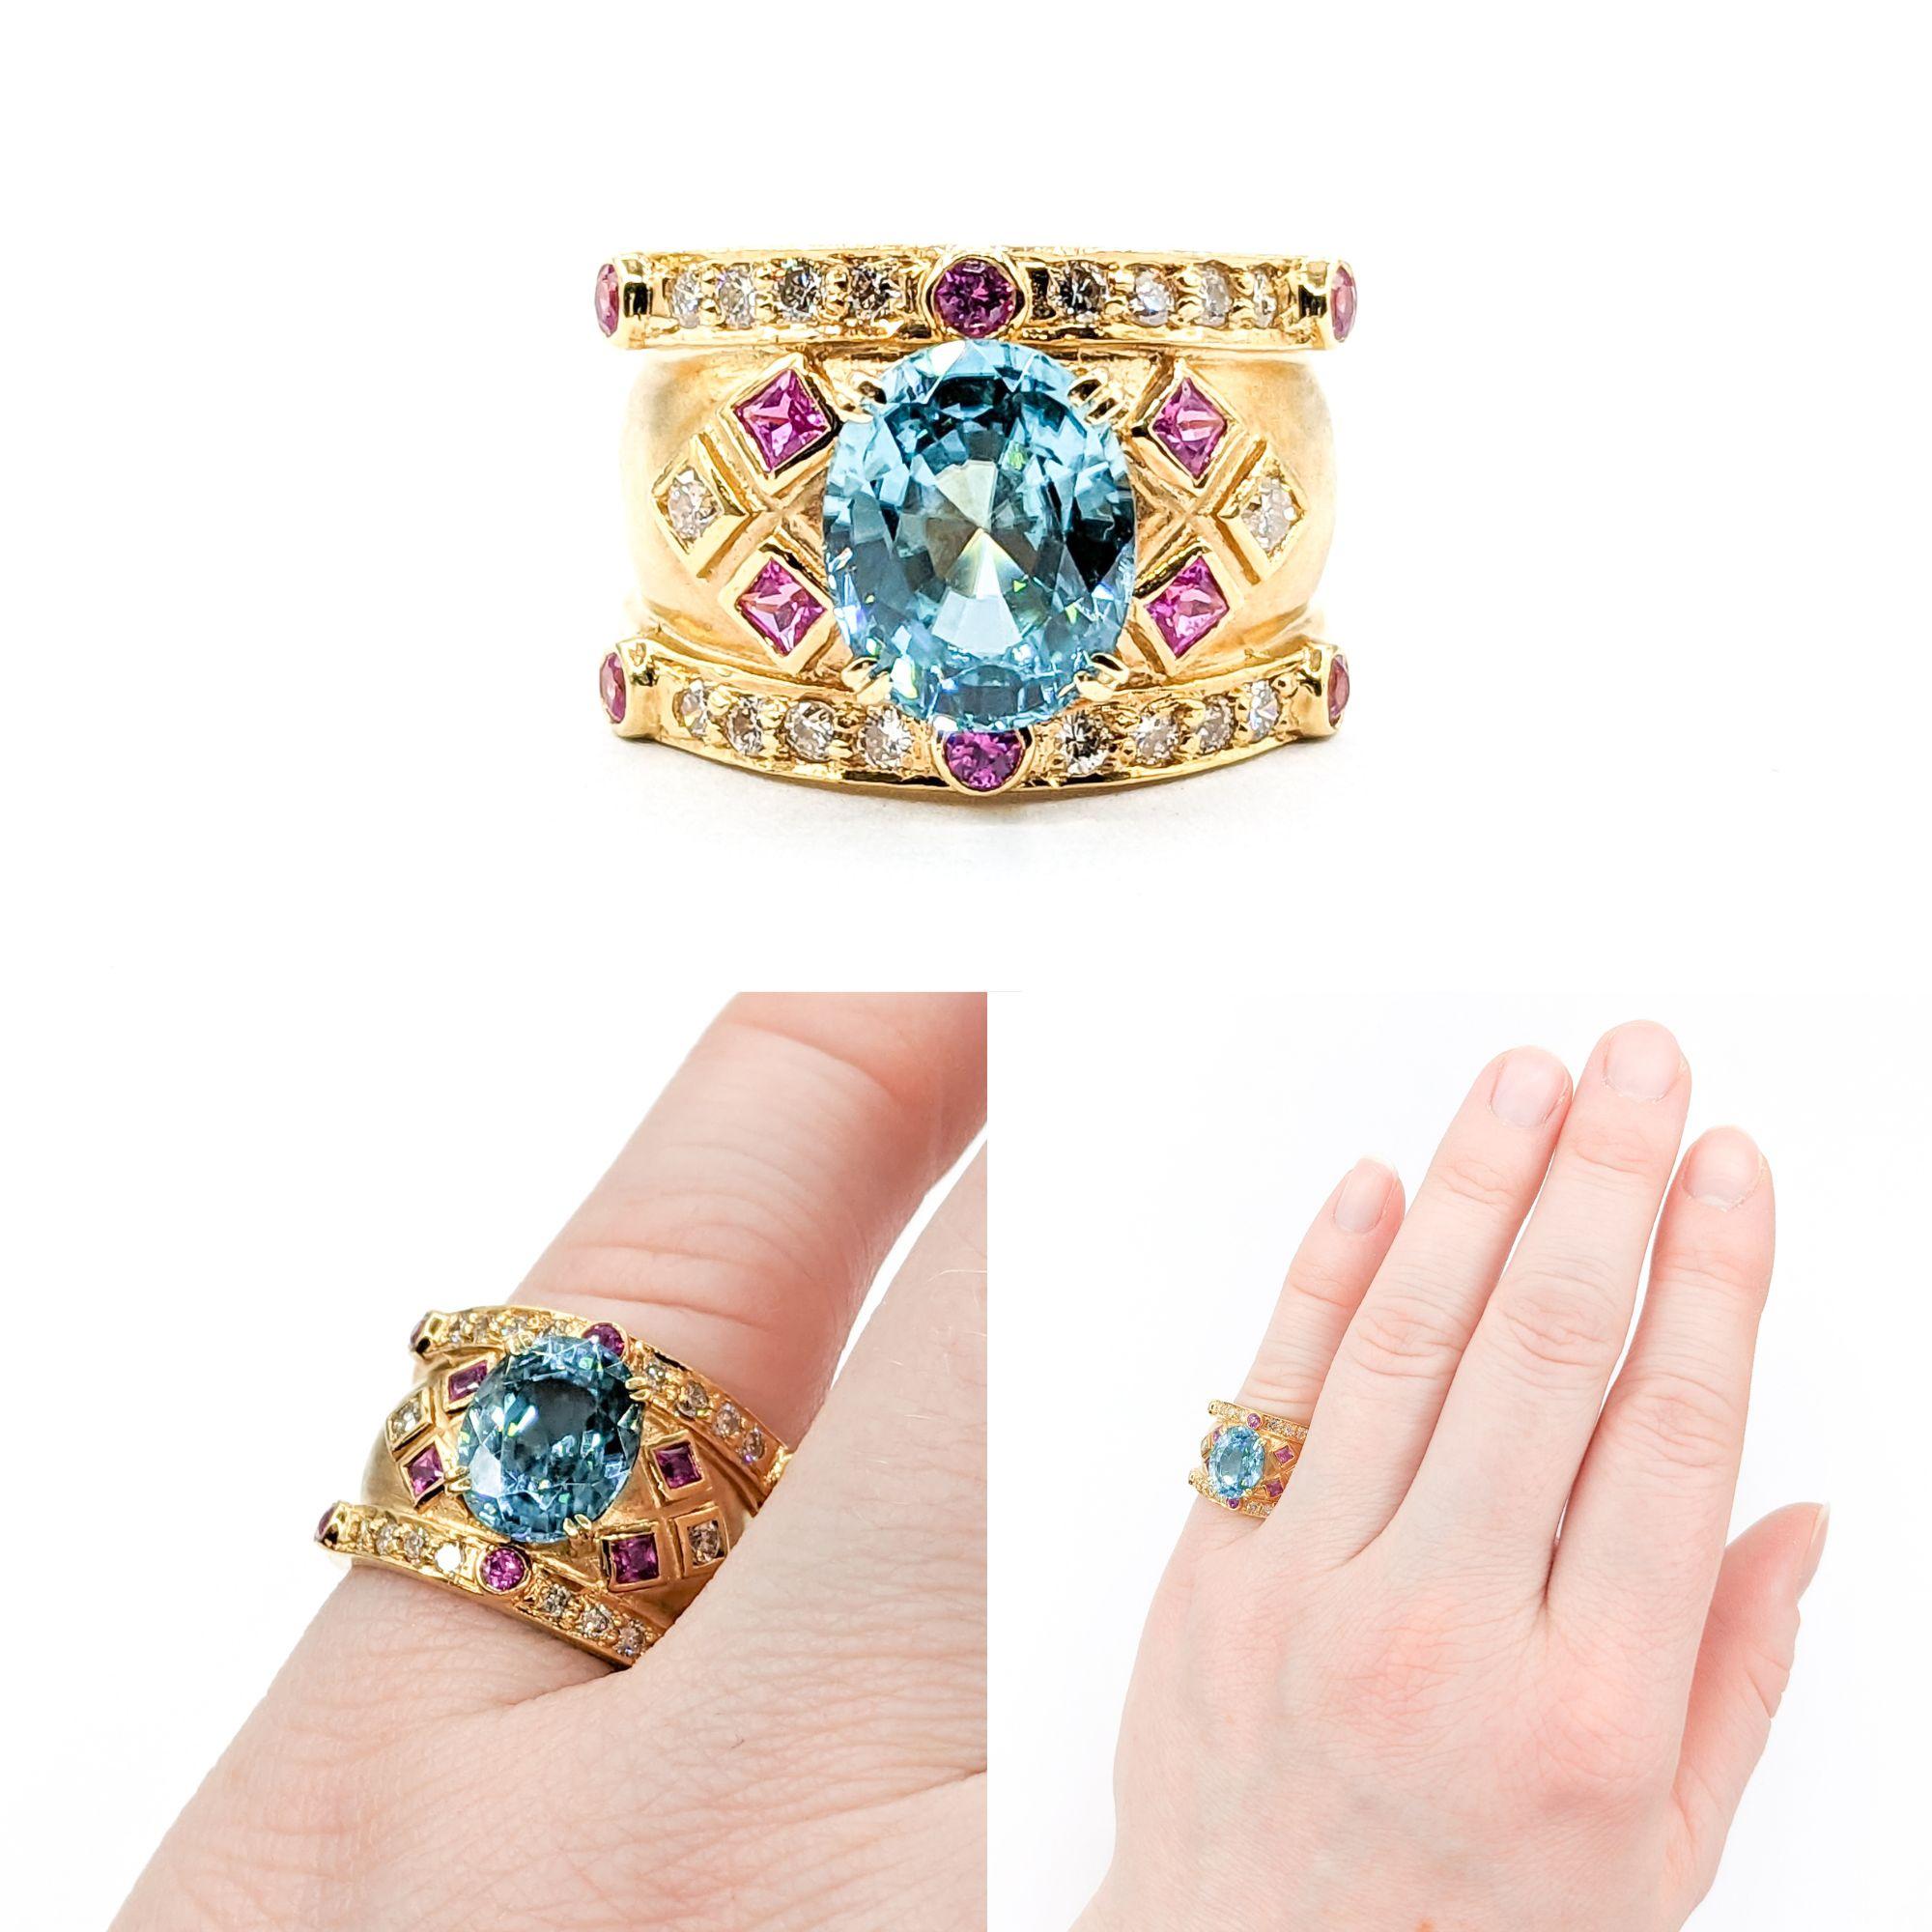 5.2ct blue zircon & Diamond & .50ctw Pink Sapphire Ring In Yellow Gold

Crafted in elegant 18kt Yellow gold, this Gemstone Fashion Ring boasts a stunning 5.2ct blue zircon centerpiece, complemented by .20ctw round diamonds of SI clarity and near